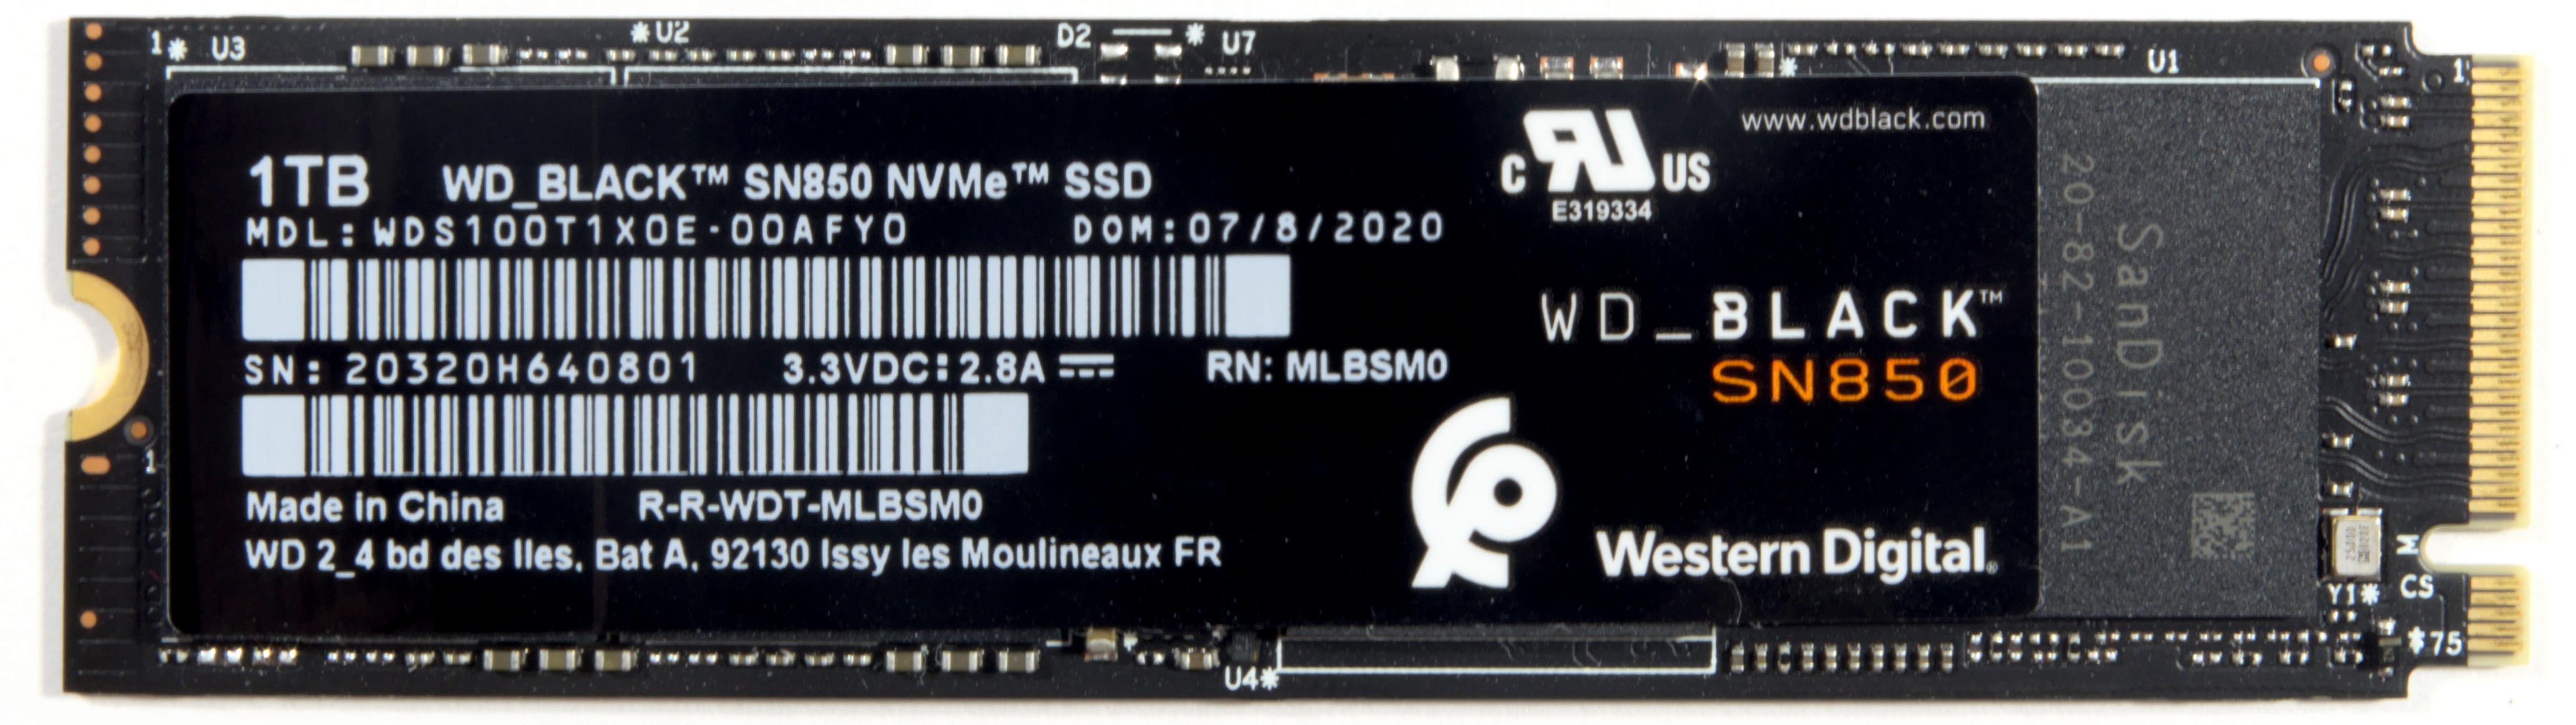 The Western Digital WD Black SN850 Review: A Very Fast PCIe 4.0 SSD